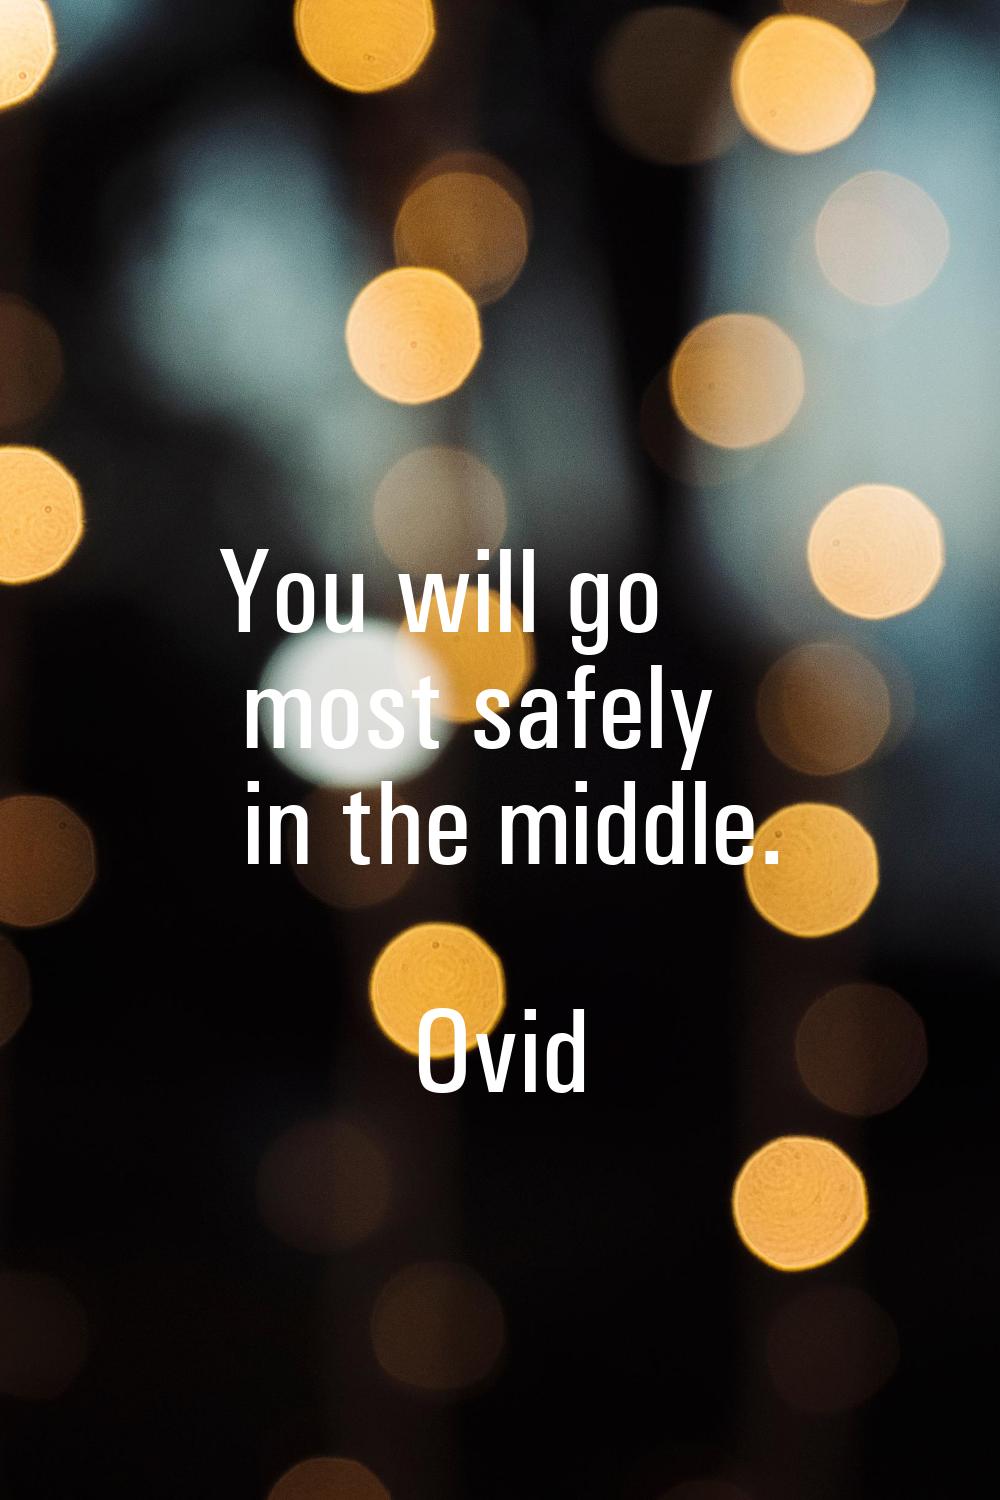 You will go most safely in the middle.